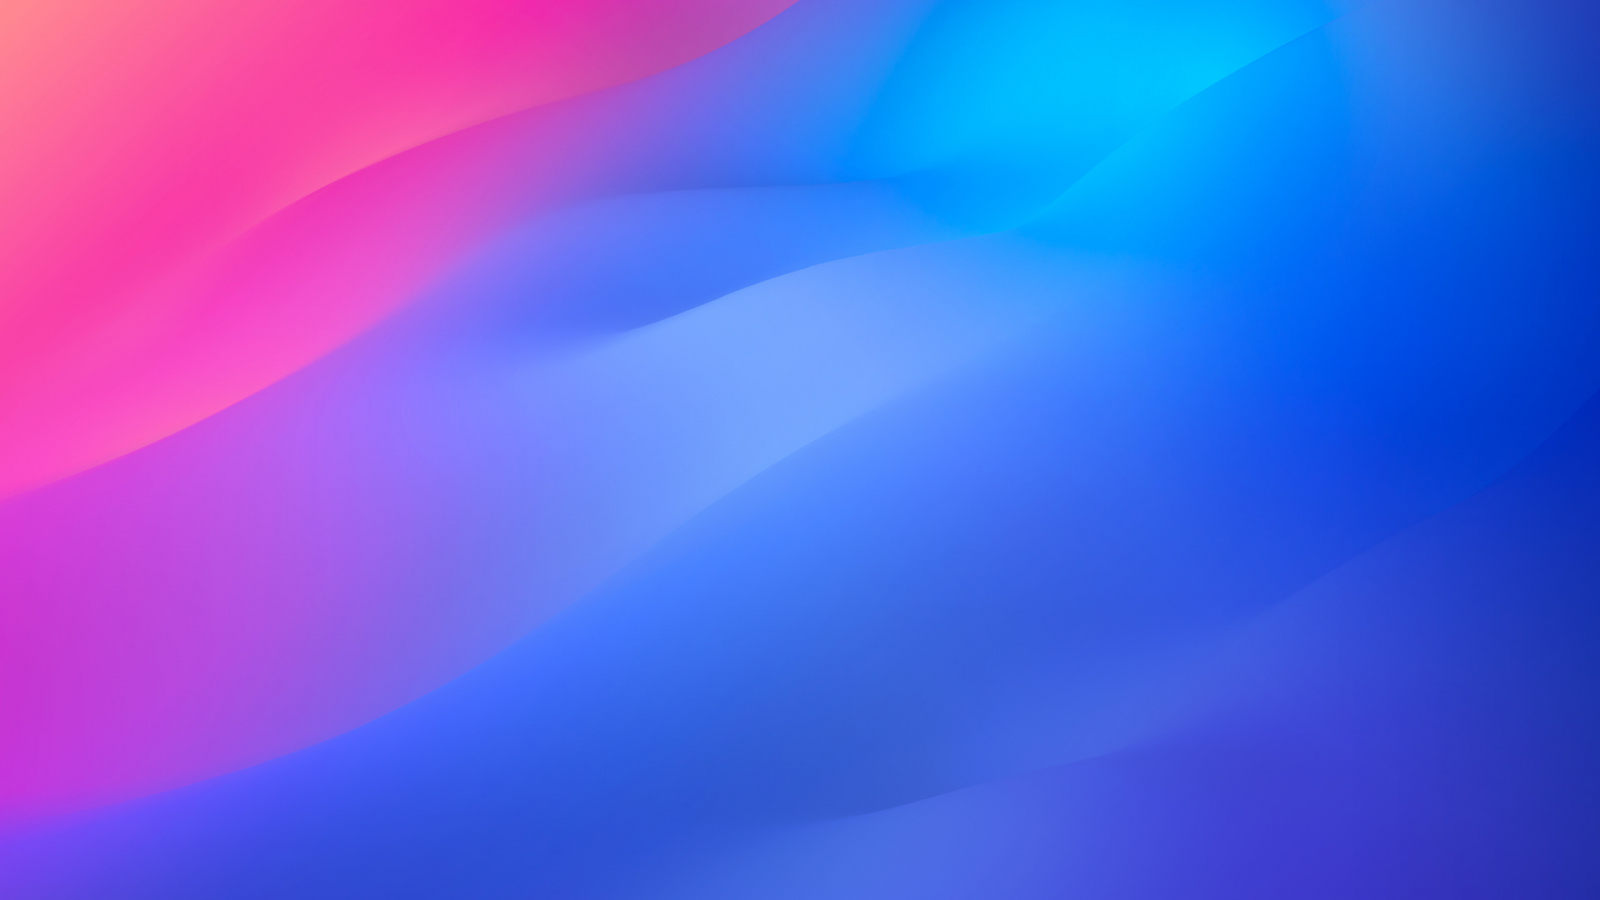 Download wallpaper 1600x900 gradient, abstract, blue pink, vivo, 16:9  widescreen 1600x900 hd background, 15048